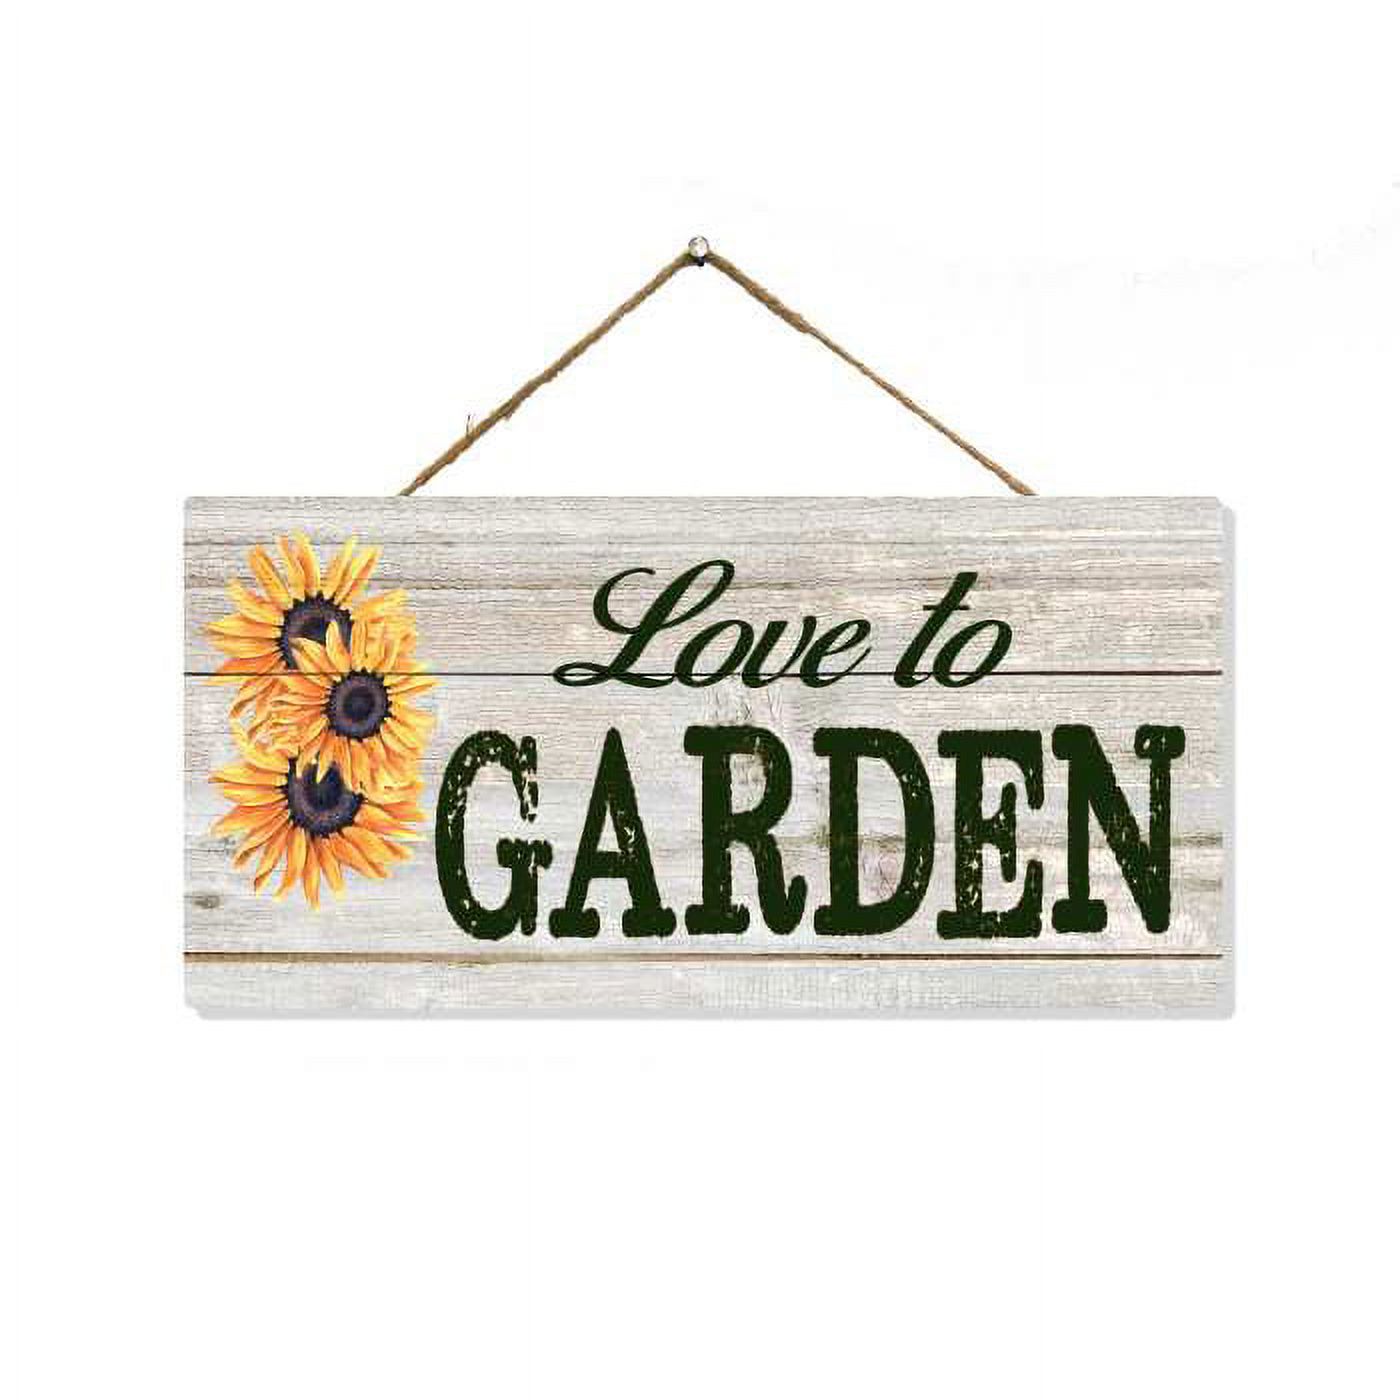 Love to Garden SIgn Rustic Wood Sign Wall Décor Gardening Herb Moms Plant Flowers She Shed Decorative Hanging Plaque Farm Vegetable Gift SP-05100001017 - image 1 of 3